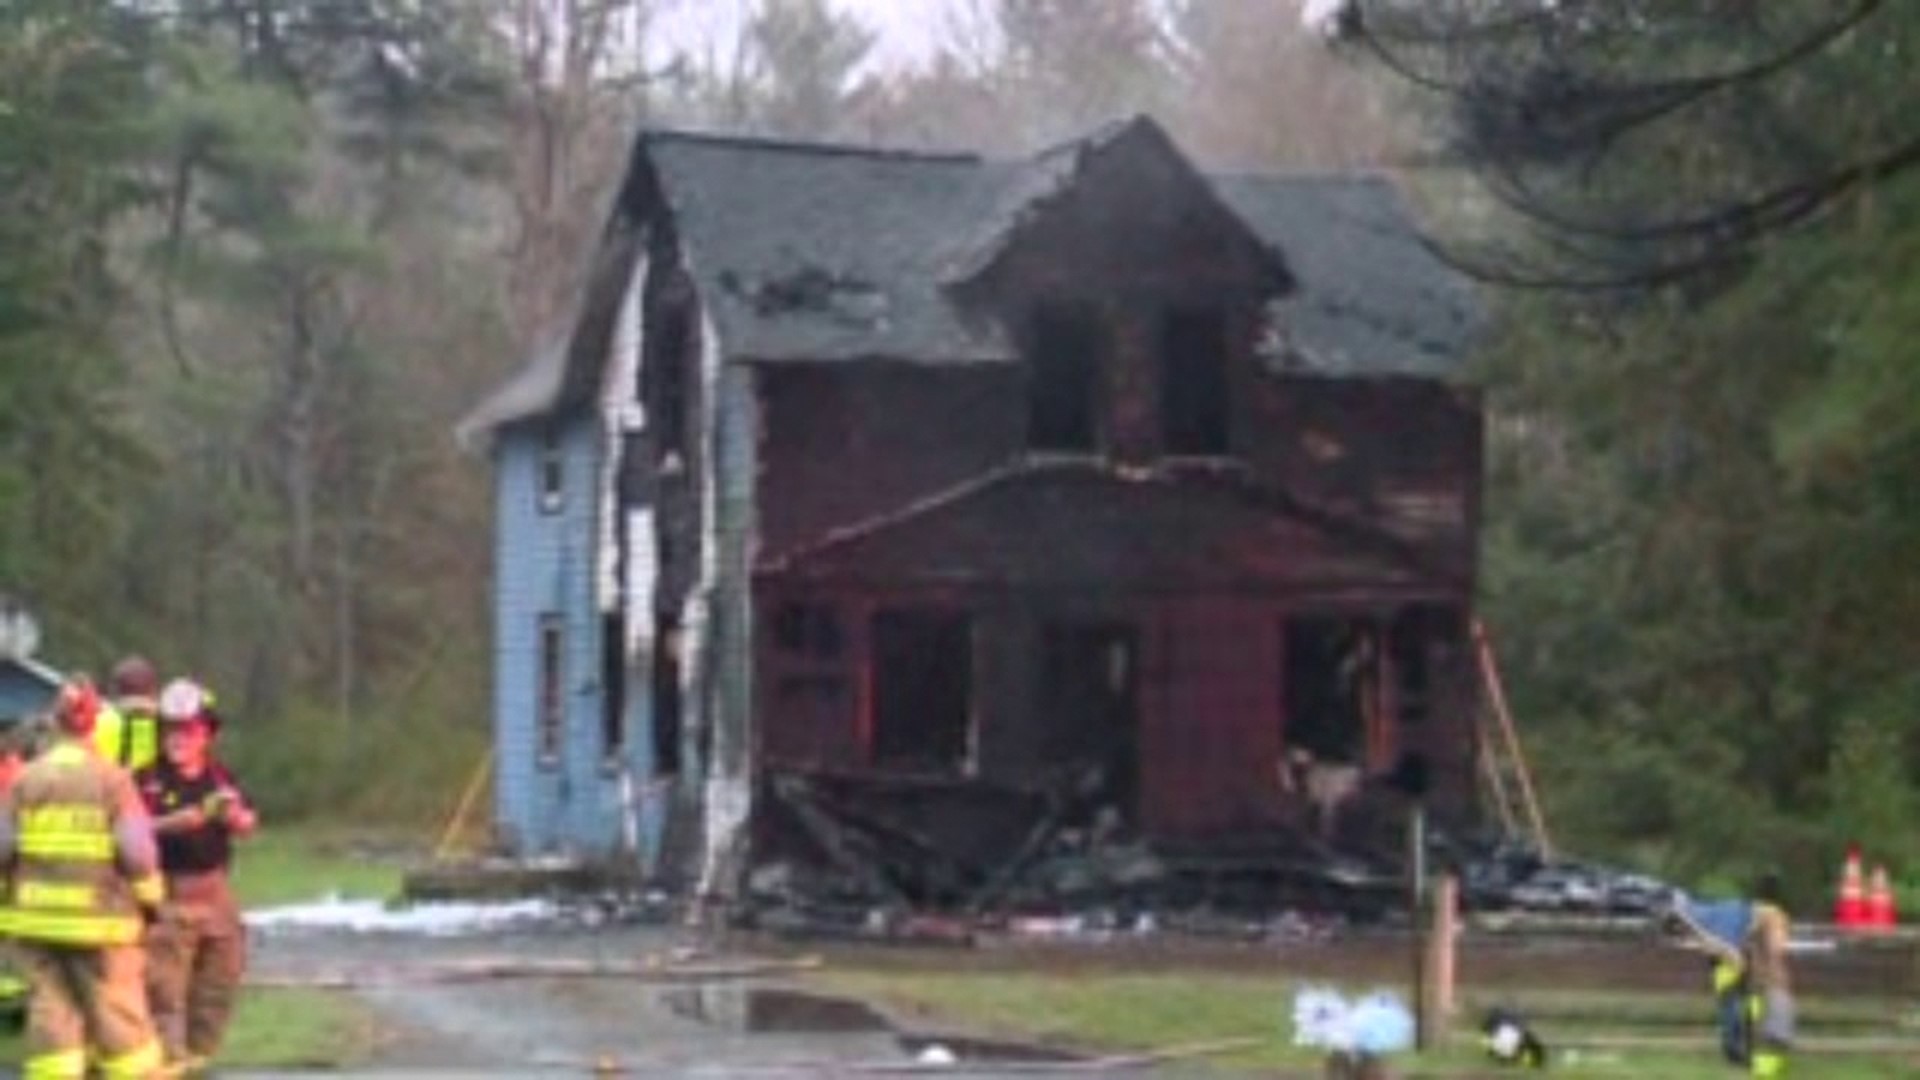 Flames broke out at the home near Canadensis around early Monday.